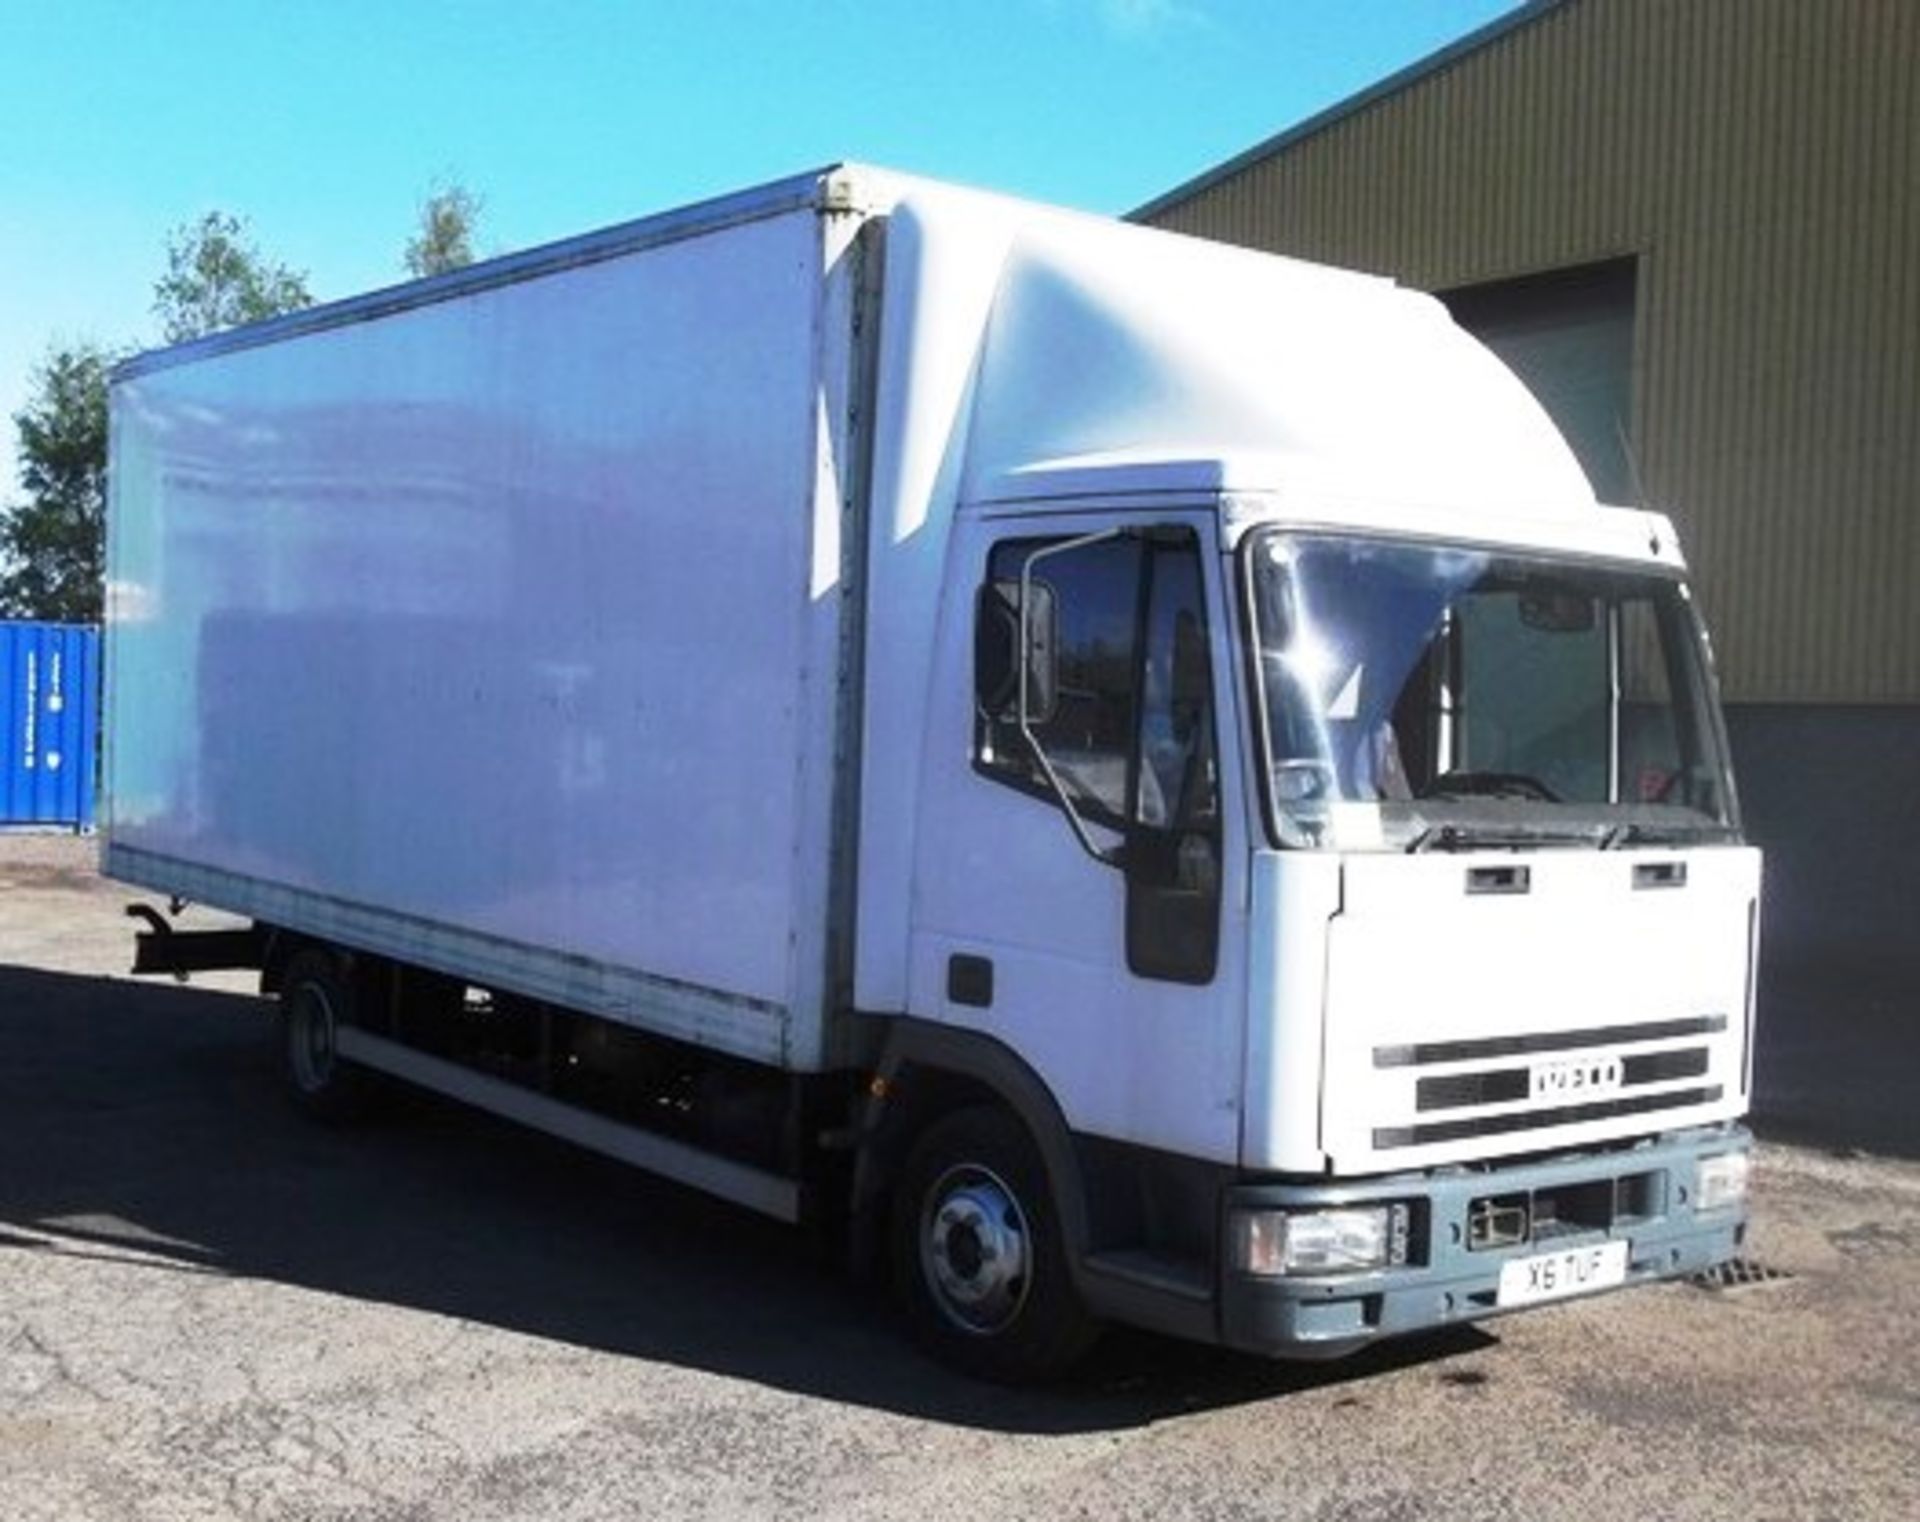 IVECO-FORD CARGO TECTOR - 3920cc
Body: 2 Dr Van
Color: White
First Reg: 05/03/2004
Doors: 2
MOT: - Image 4 of 10